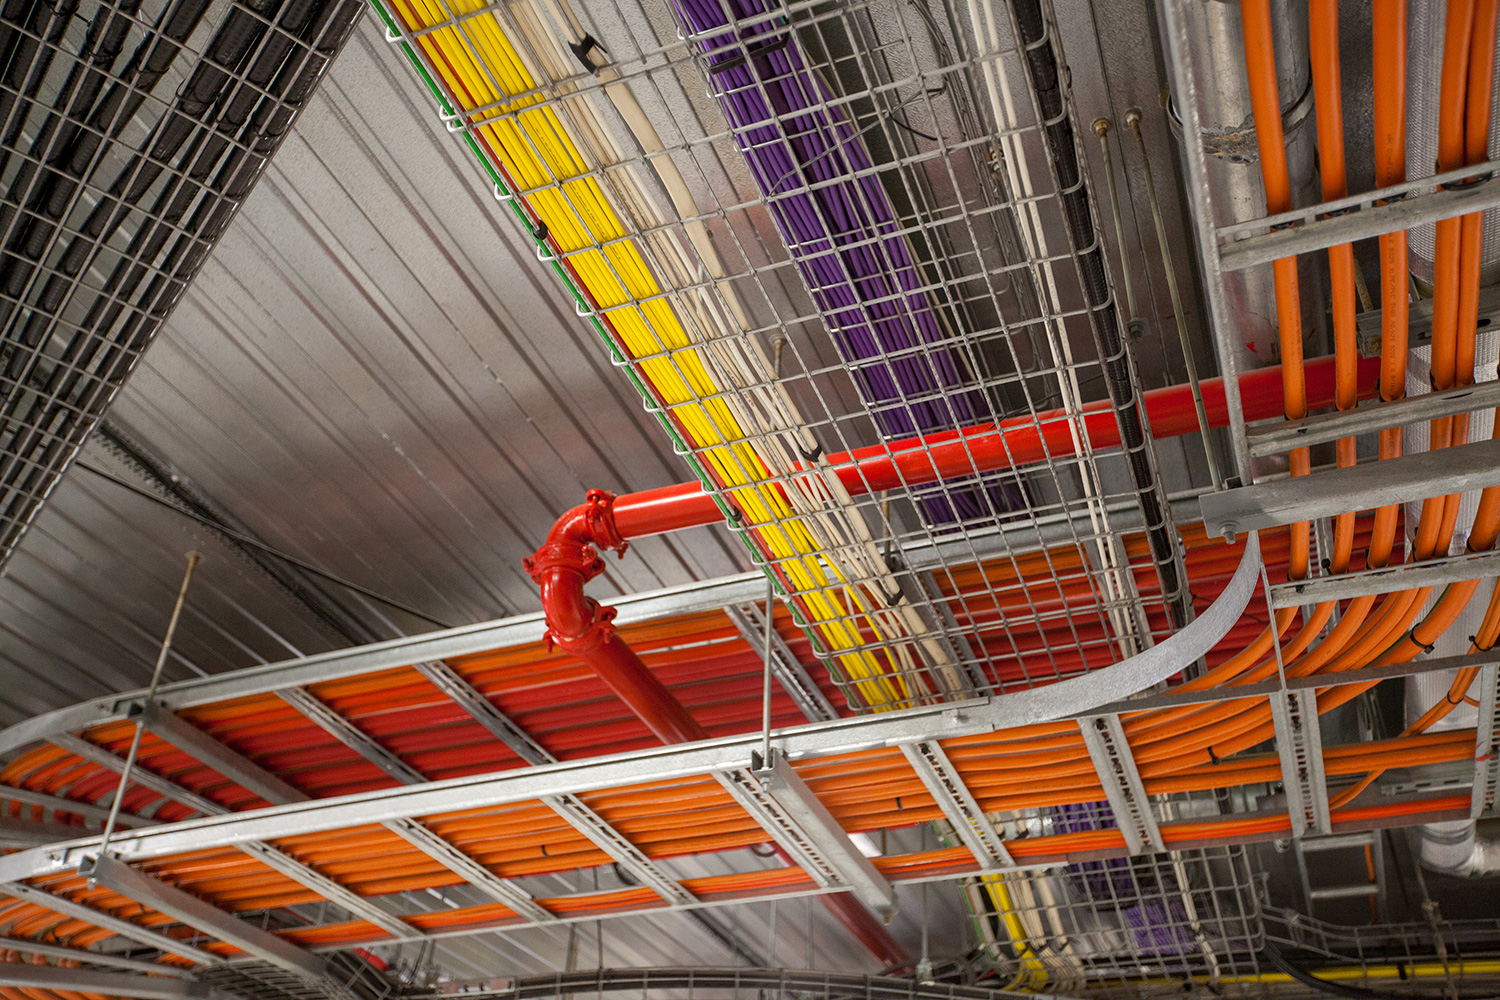 Large overhead view of structured cabling in a distribution center